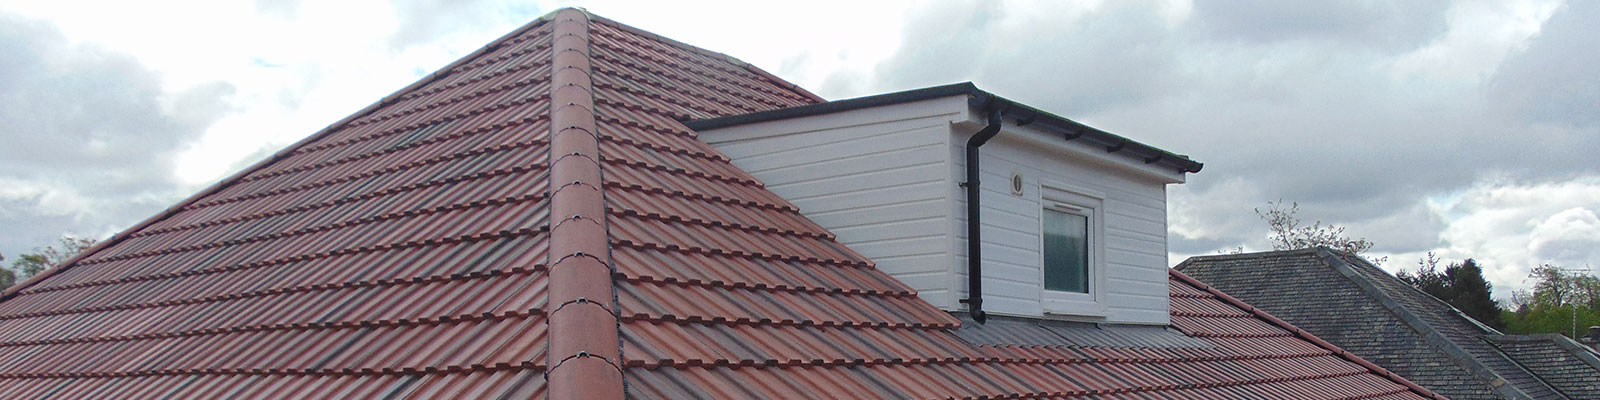 Tile Roofing Services across Glasgow